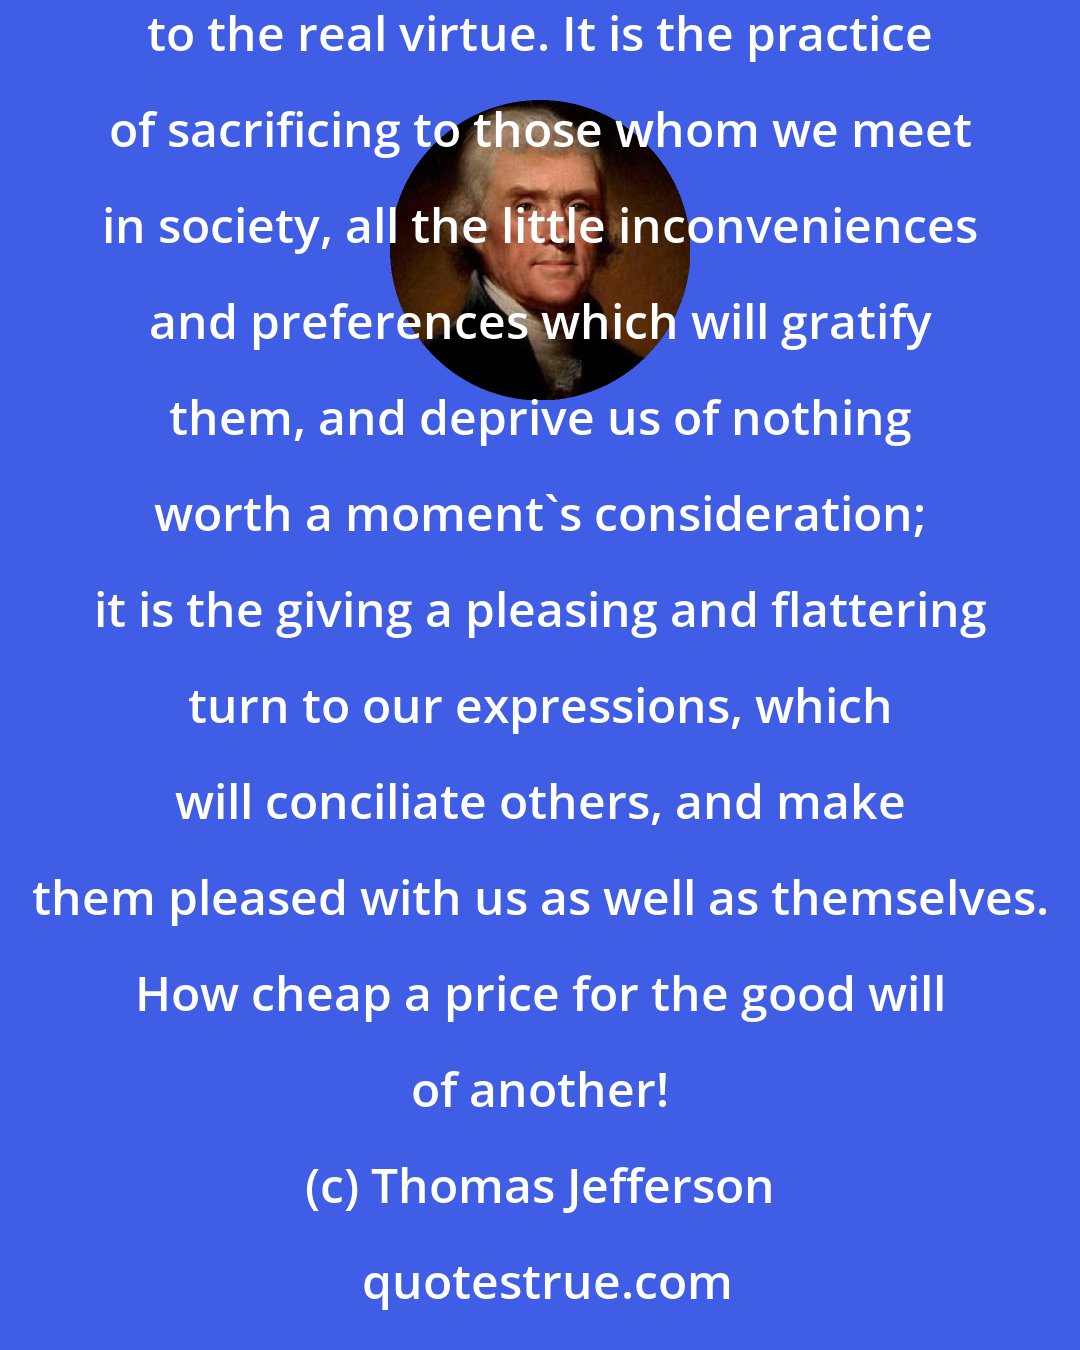 Thomas Jefferson: In truth, politeness is artificial good humor, it covers the natural want of it, and ends by rendering habitual a substitute nearly equivalent to the real virtue. It is the practice of sacrificing to those whom we meet in society, all the little inconveniences and preferences which will gratify them, and deprive us of nothing worth a moment's consideration; it is the giving a pleasing and flattering turn to our expressions, which will conciliate others, and make them pleased with us as well as themselves. How cheap a price for the good will of another!